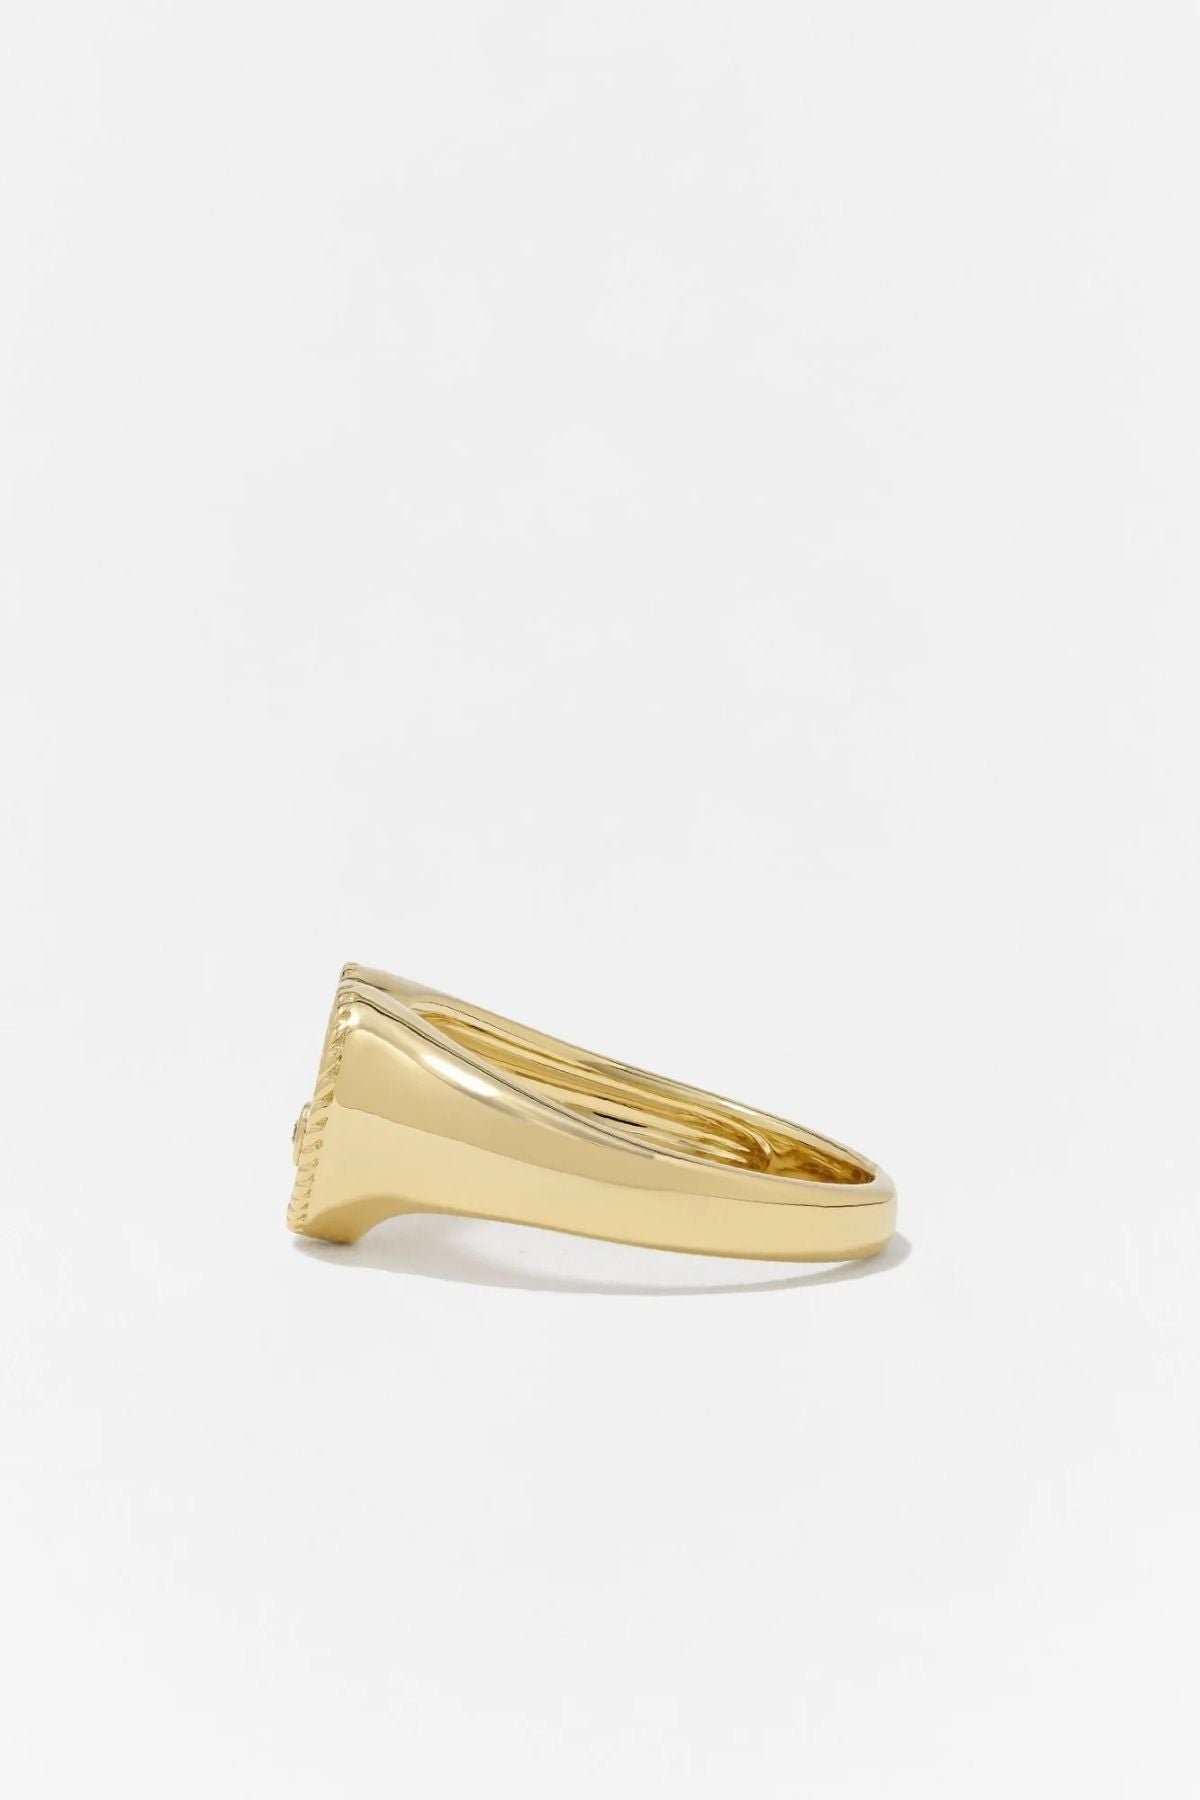 Yvonne Léon Baby Chevaliere Onyx Heart Ring - Yellow Gold